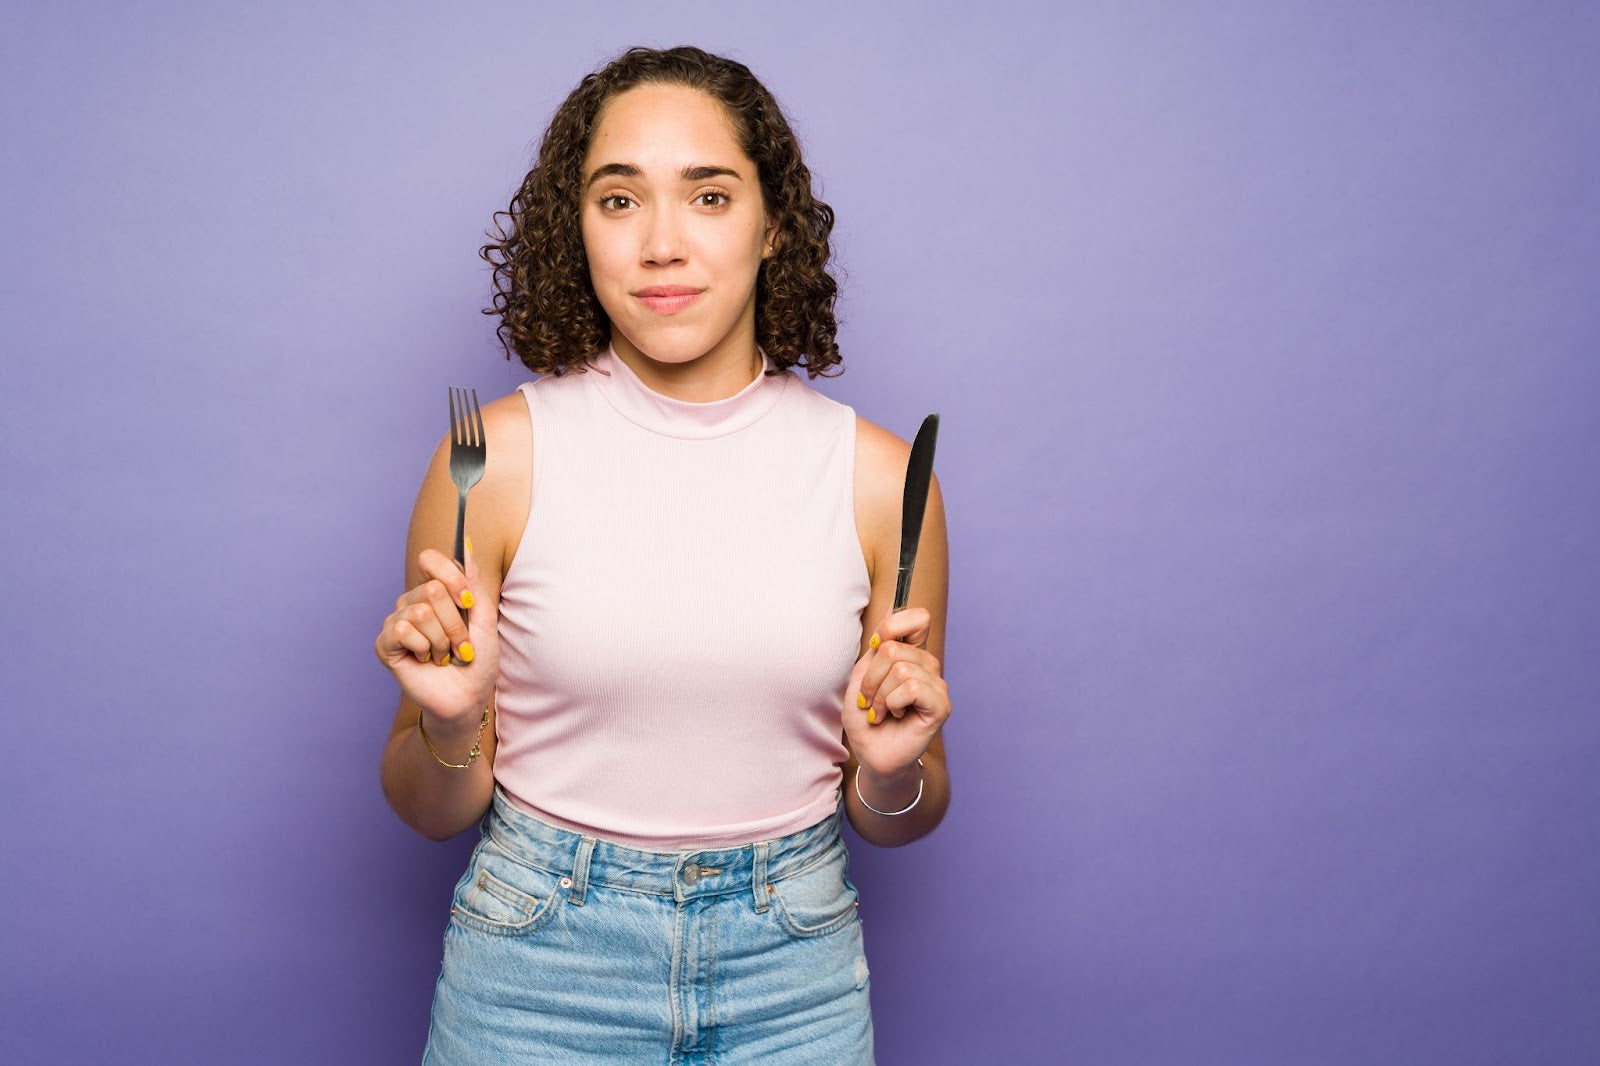 Young woman with fork and knife on purple background, symbolizing healthy meal choices and managing cravings